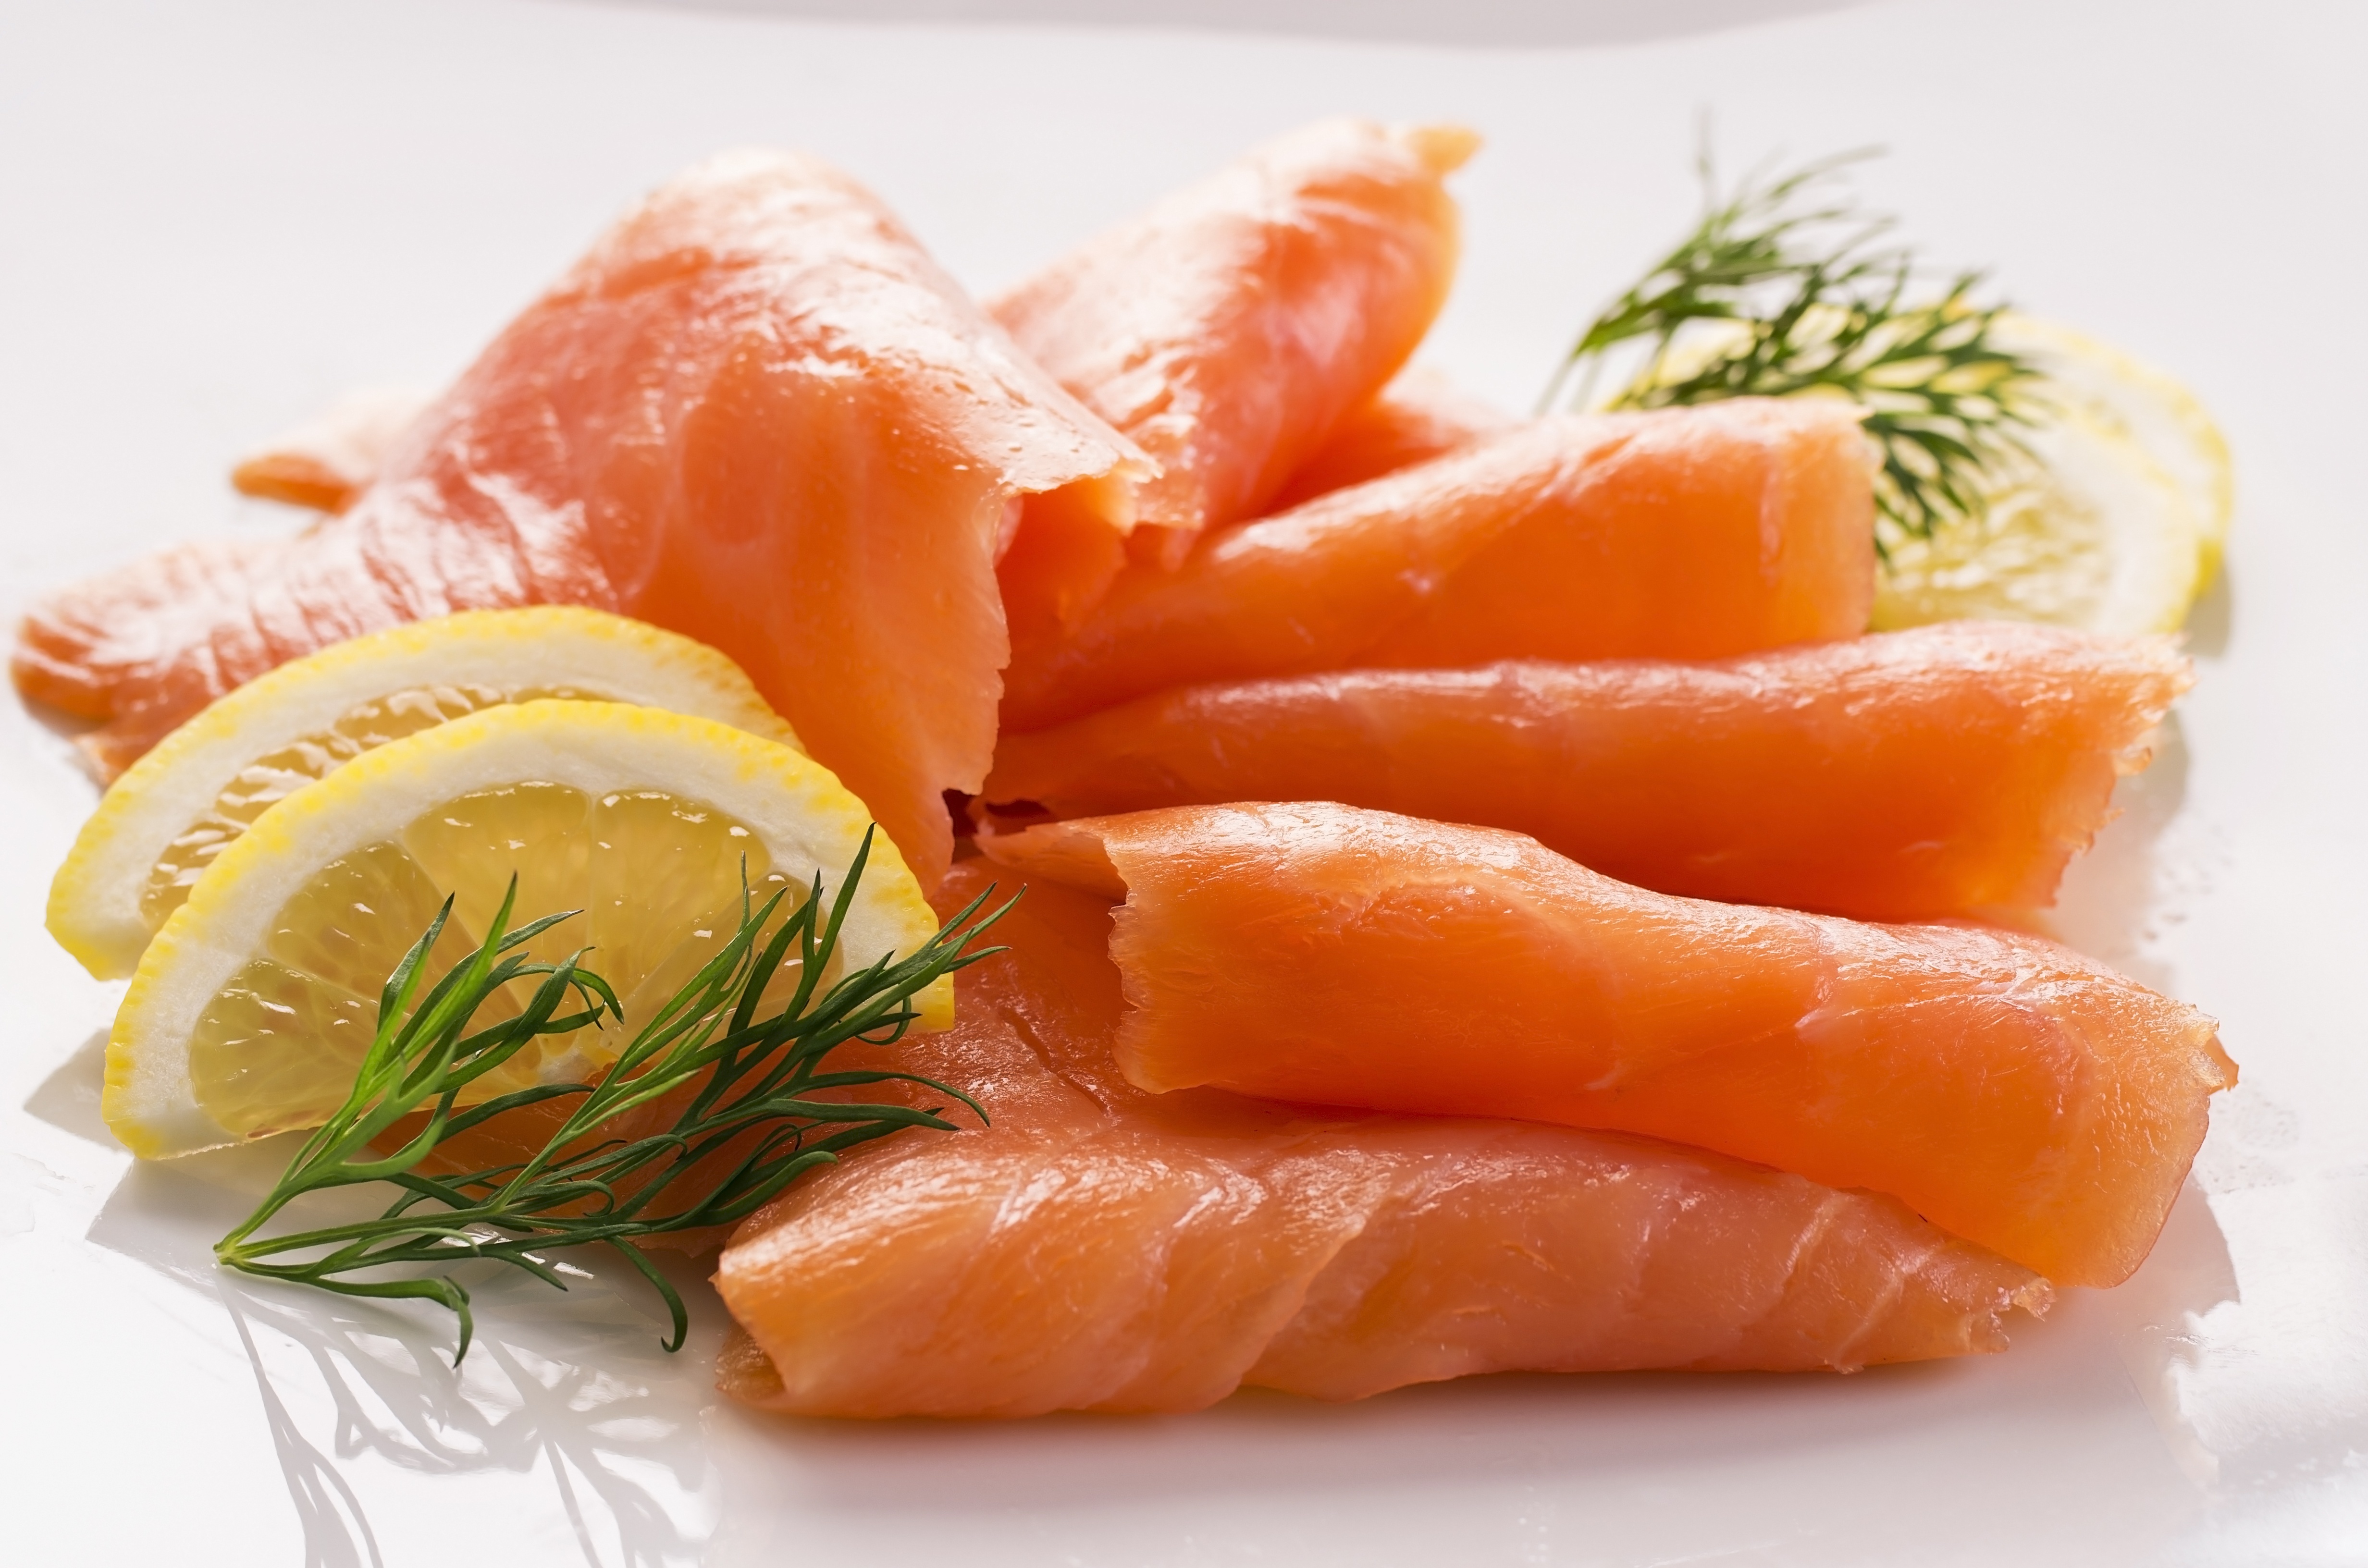 Article image for Two Australians dead after eating contaminated smoked salmon